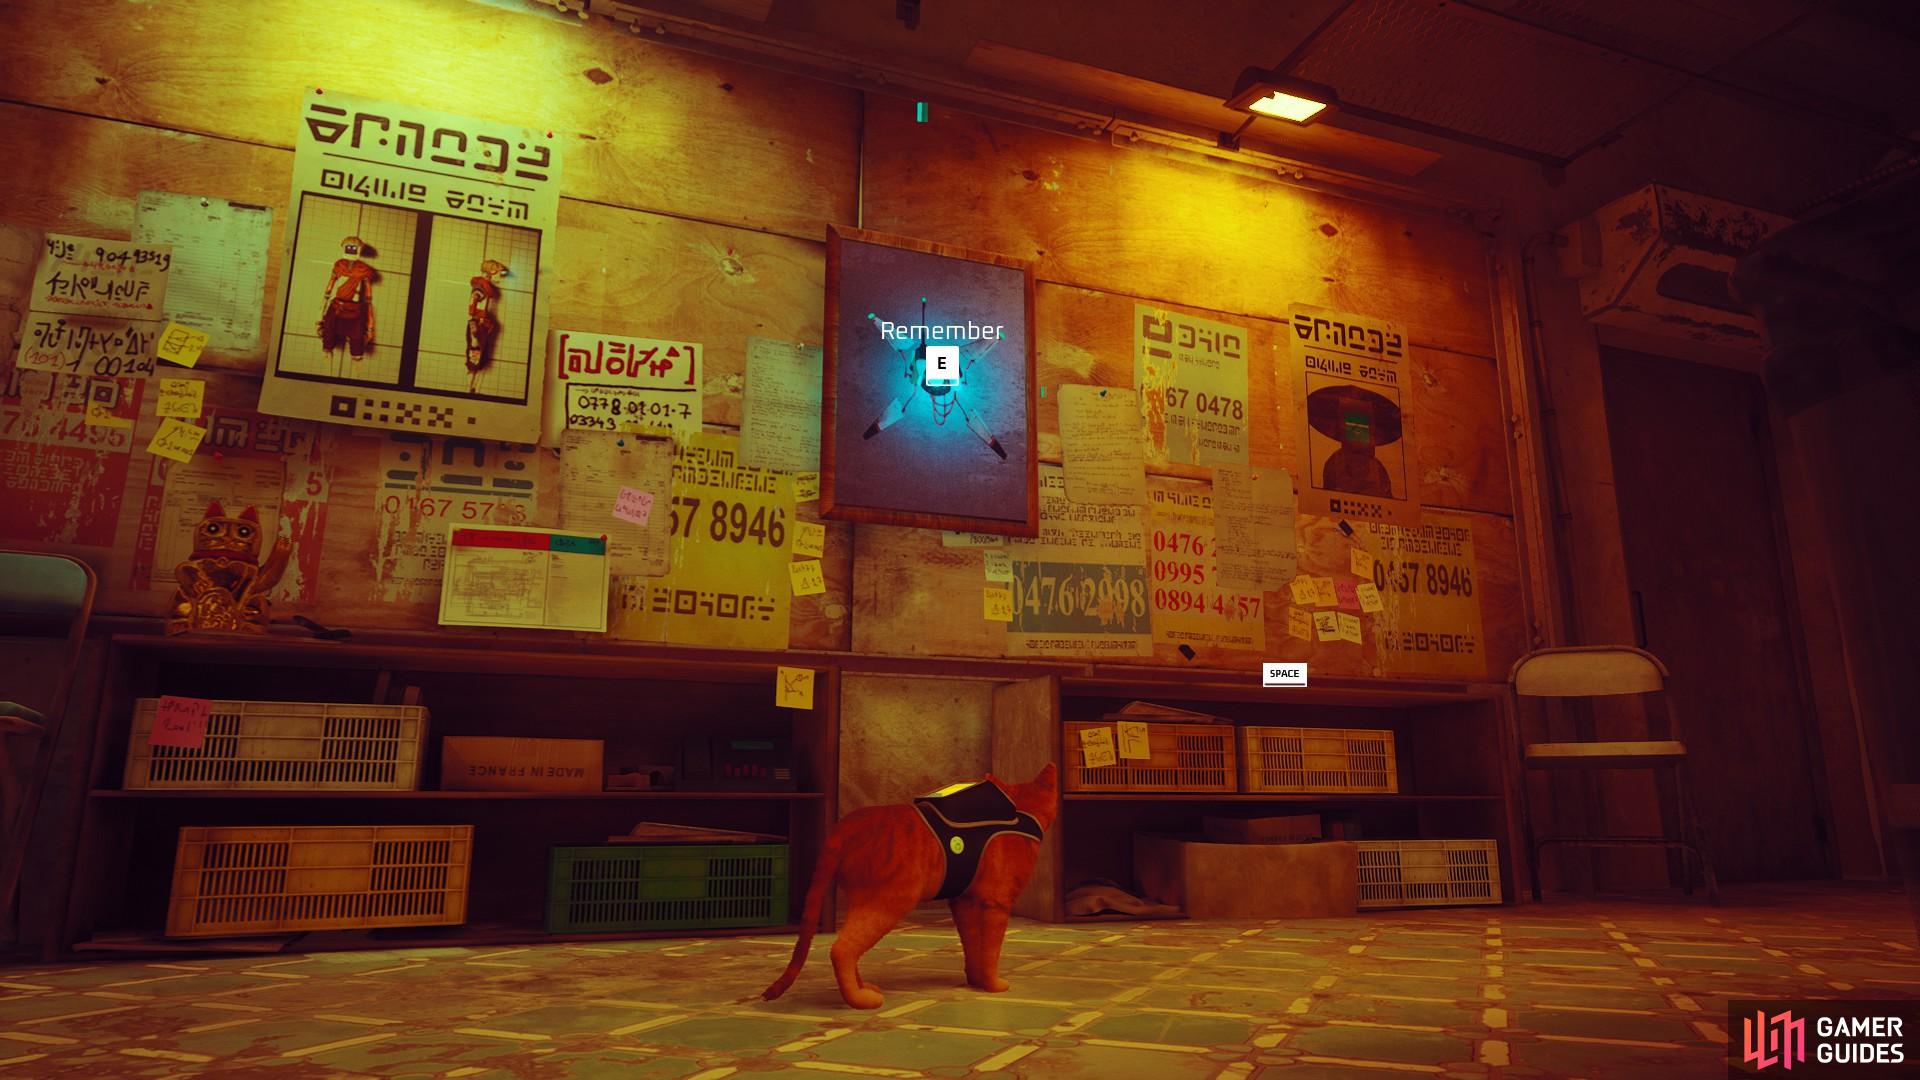 The police station memory is only accessible after the factory mission (and only then).